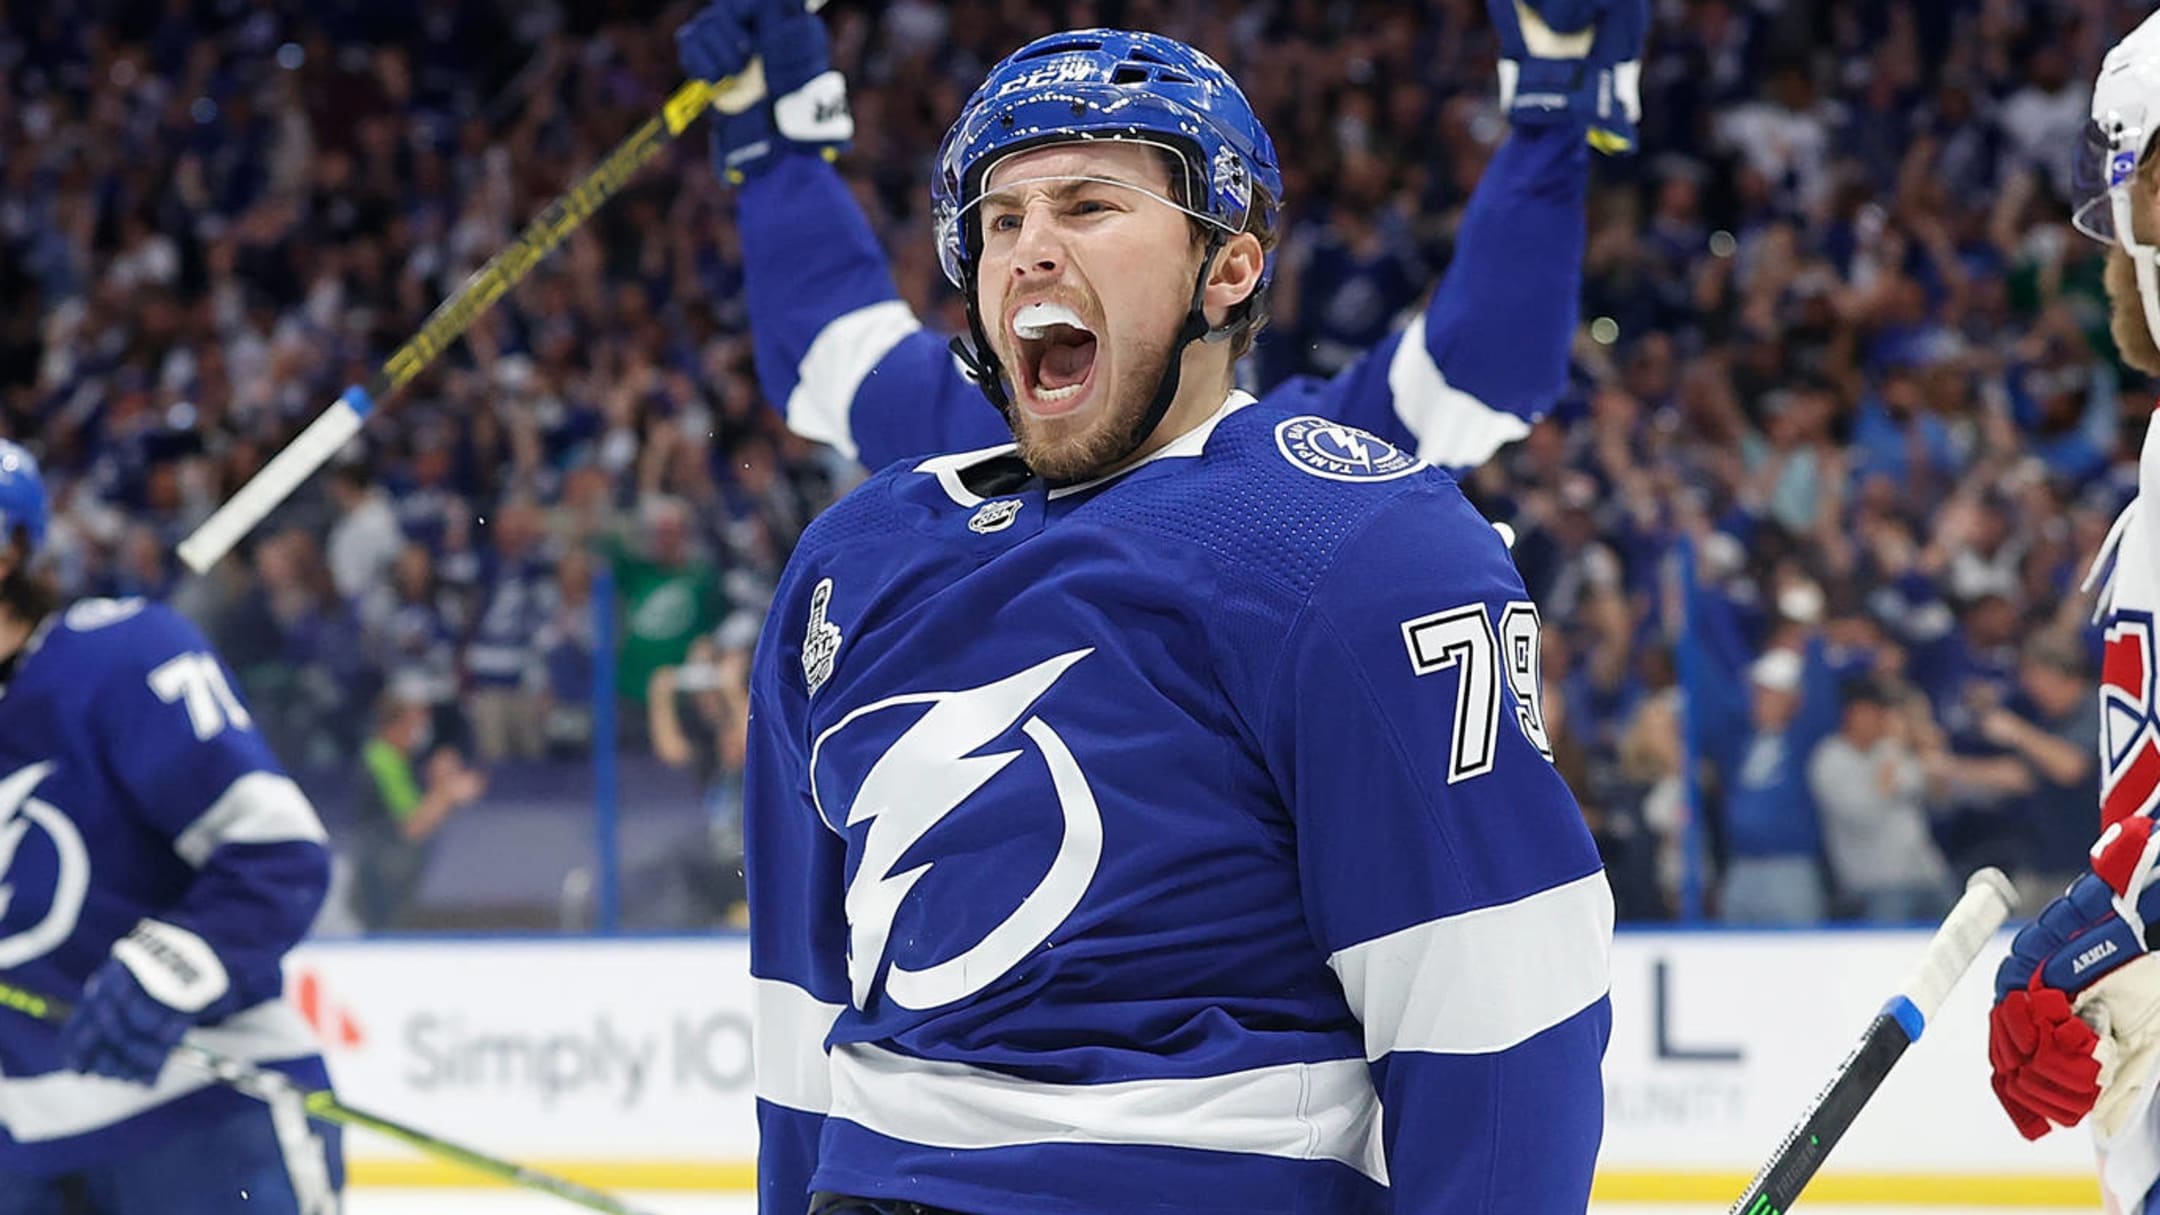 Lightning's Ross Colton agrees to 2-year deal: Reports